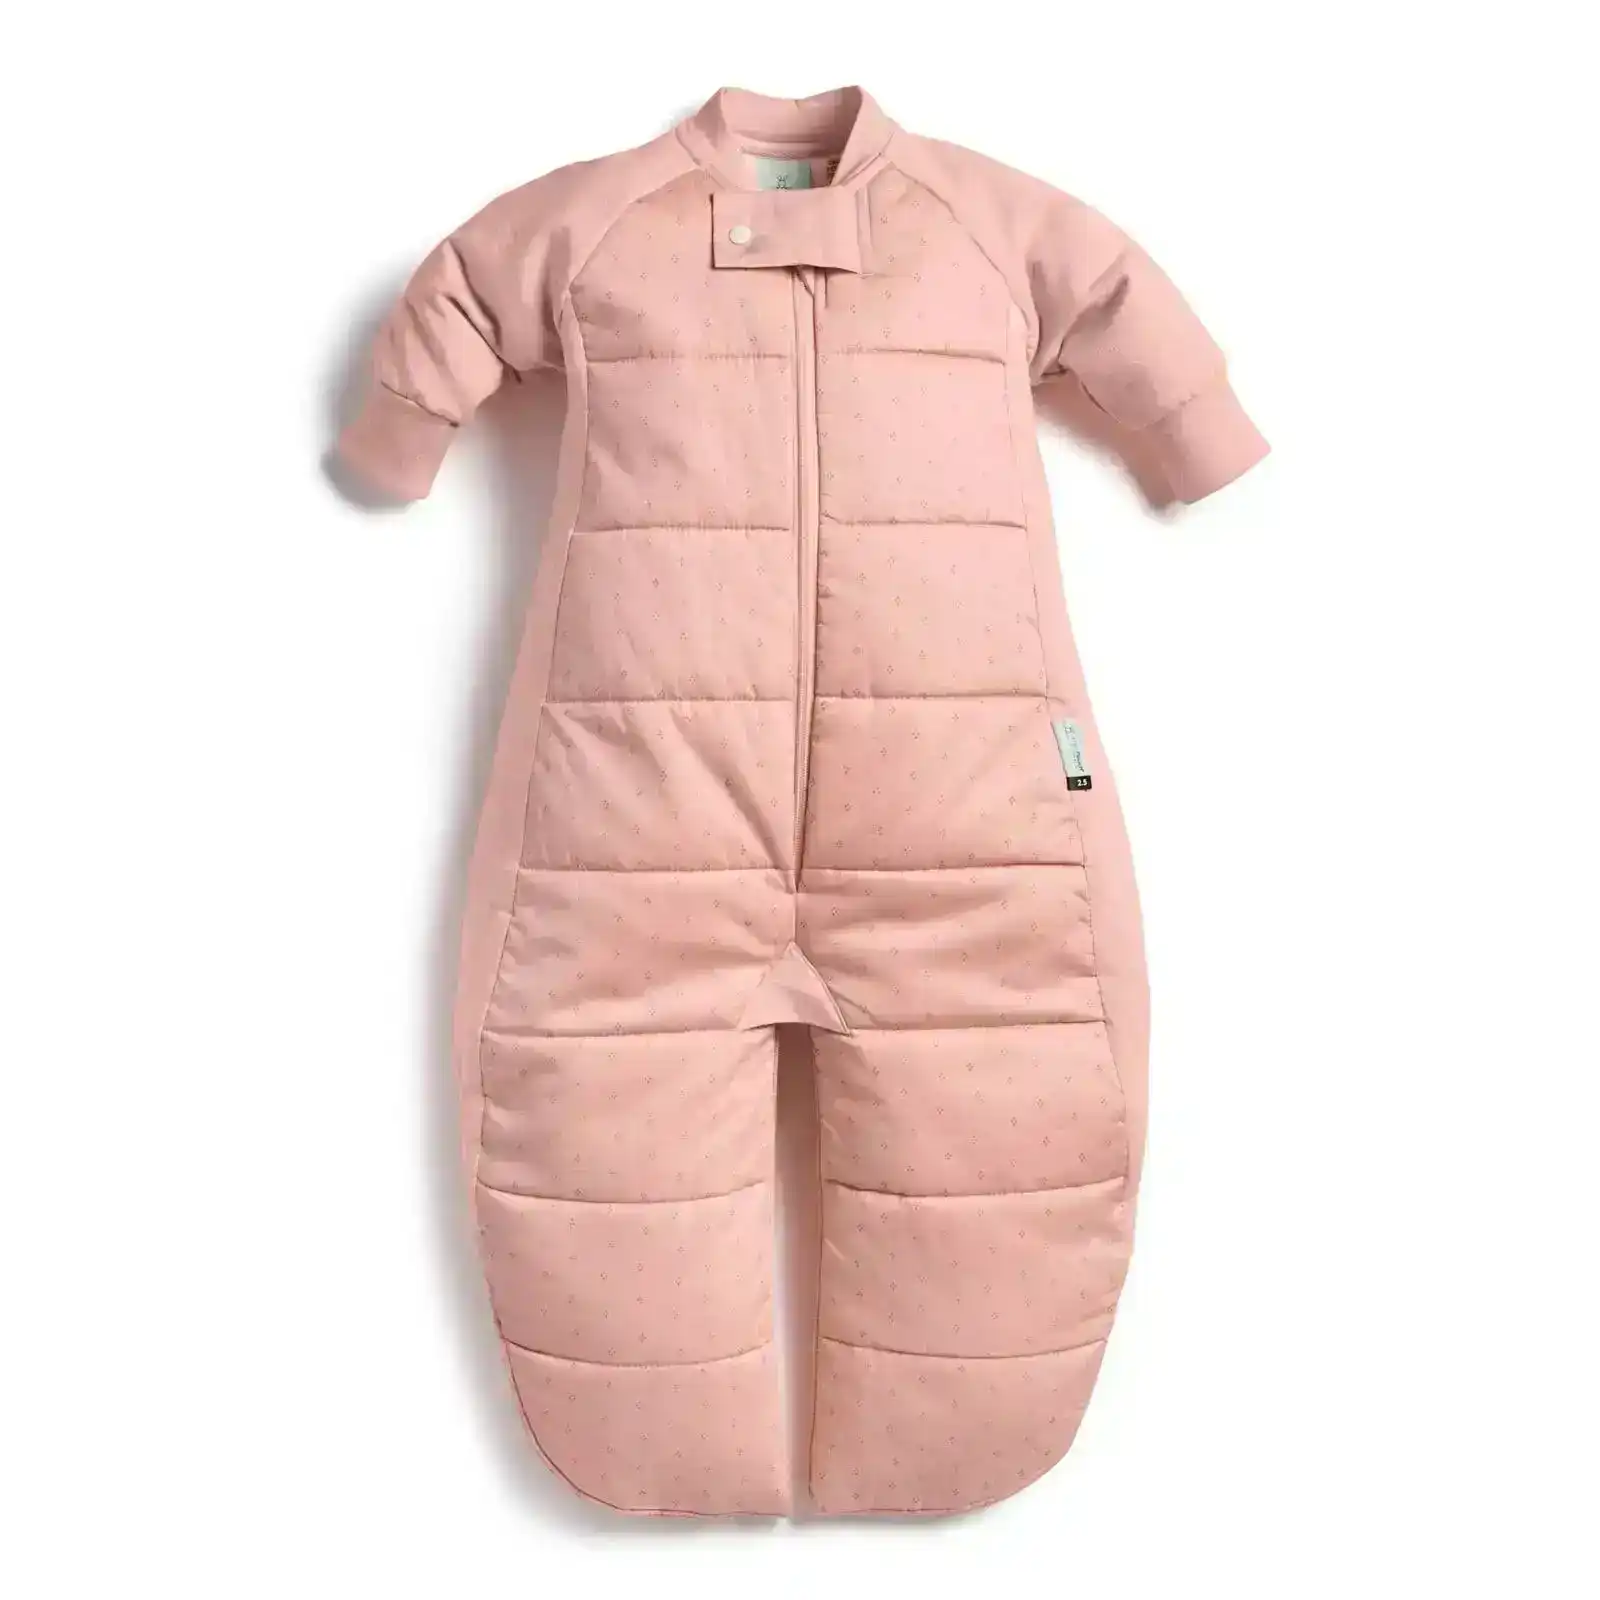 ergoPouch Organic/Cotton 3.5 TOG Sleep Suit Bag 3-12m for Baby/Toddler Berries